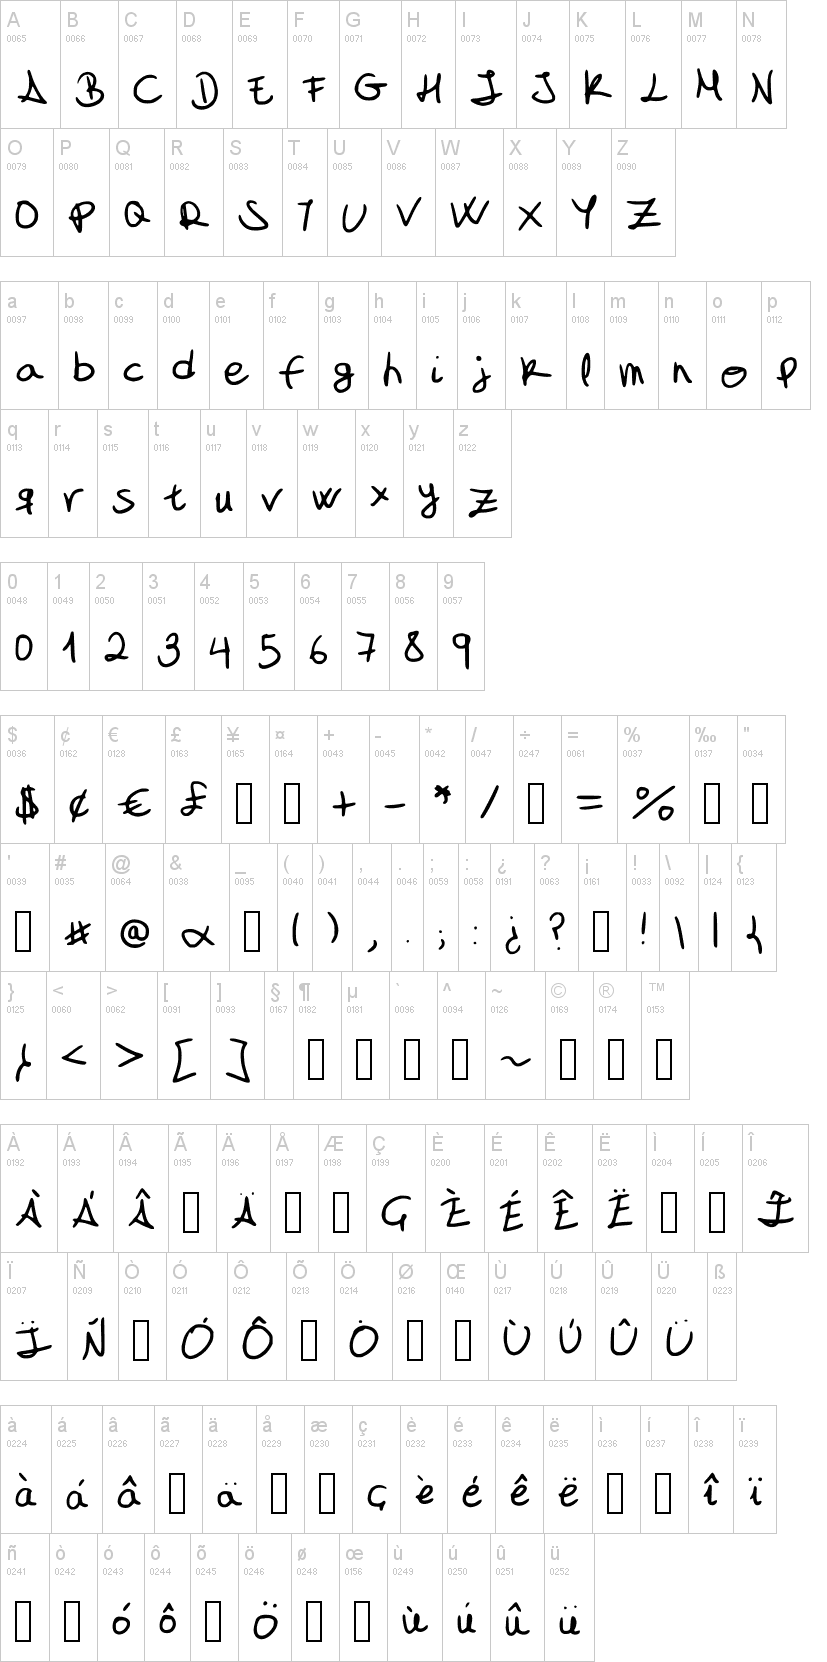 My font is a handwriting